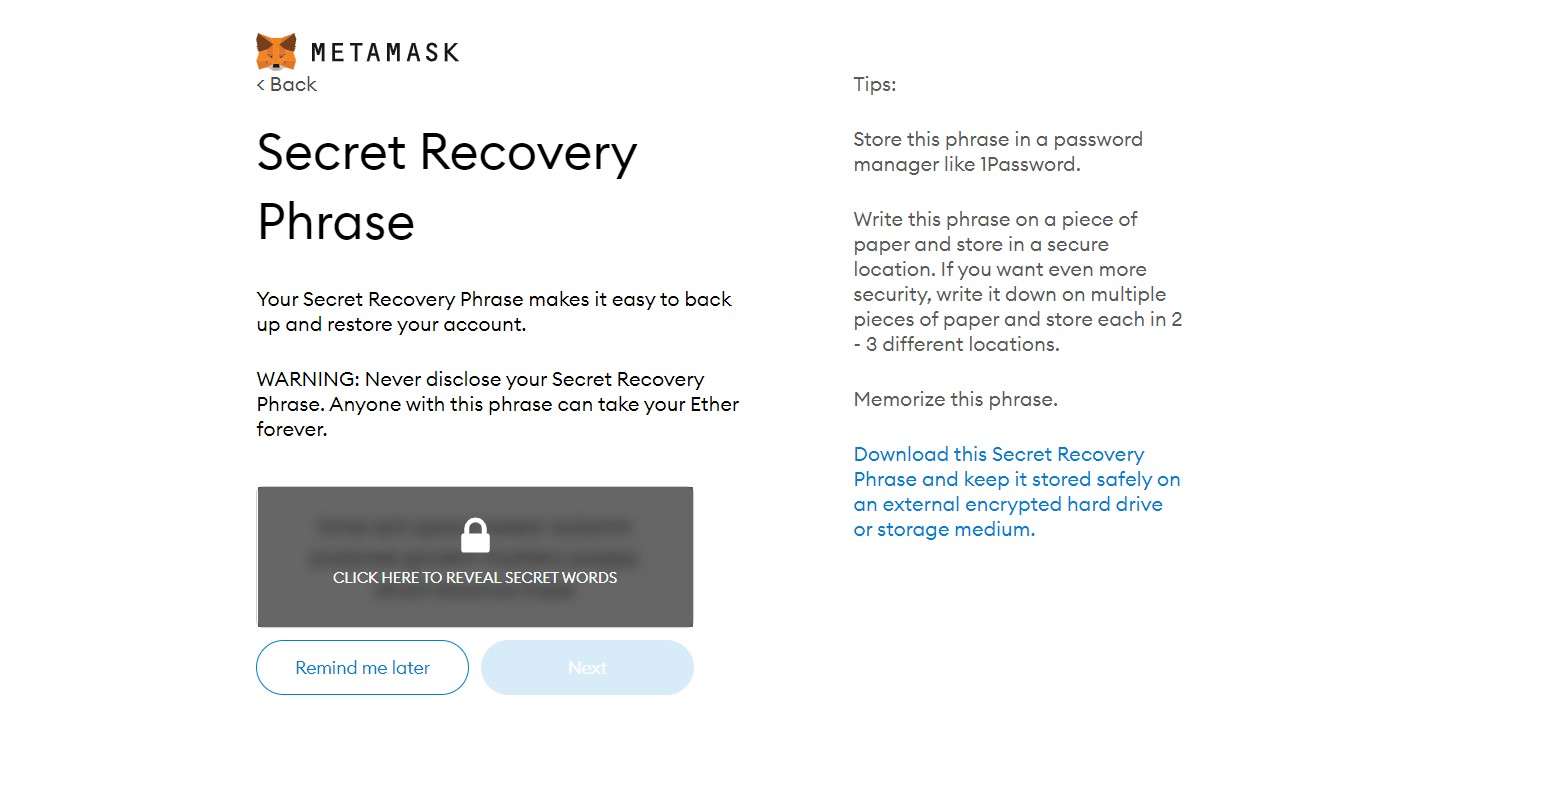 8. Secret Recovery Phase